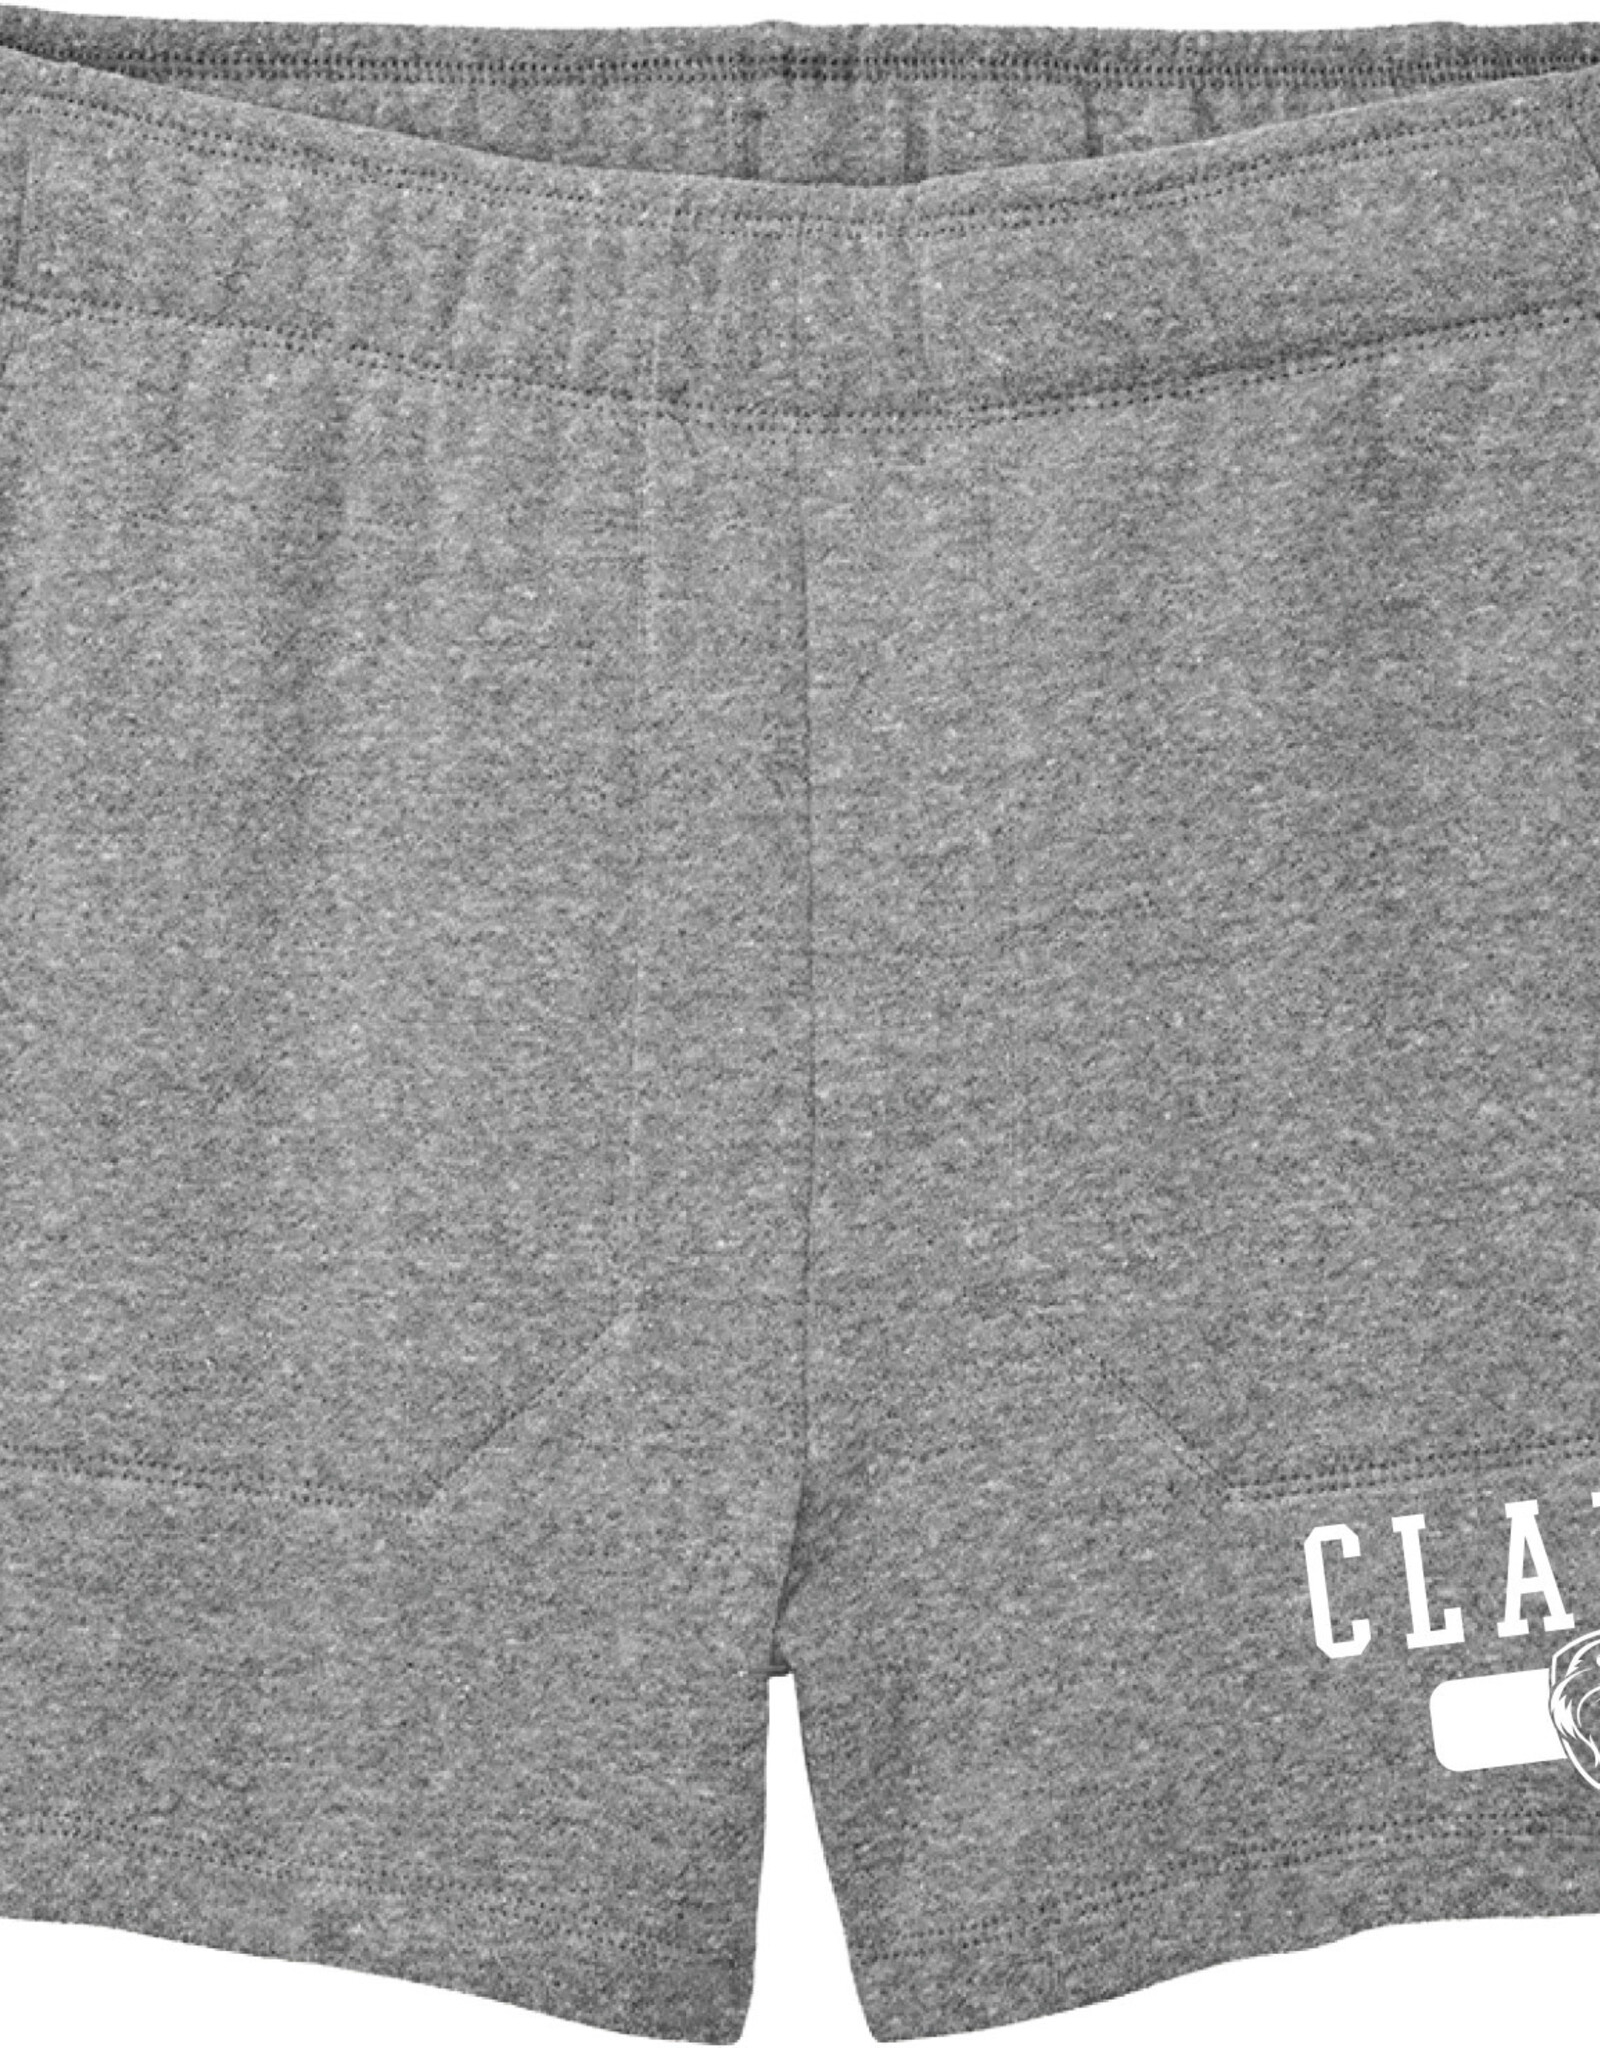 College House College House District Women's Perfect Tri Fleece Short (Grey Frost, Black)